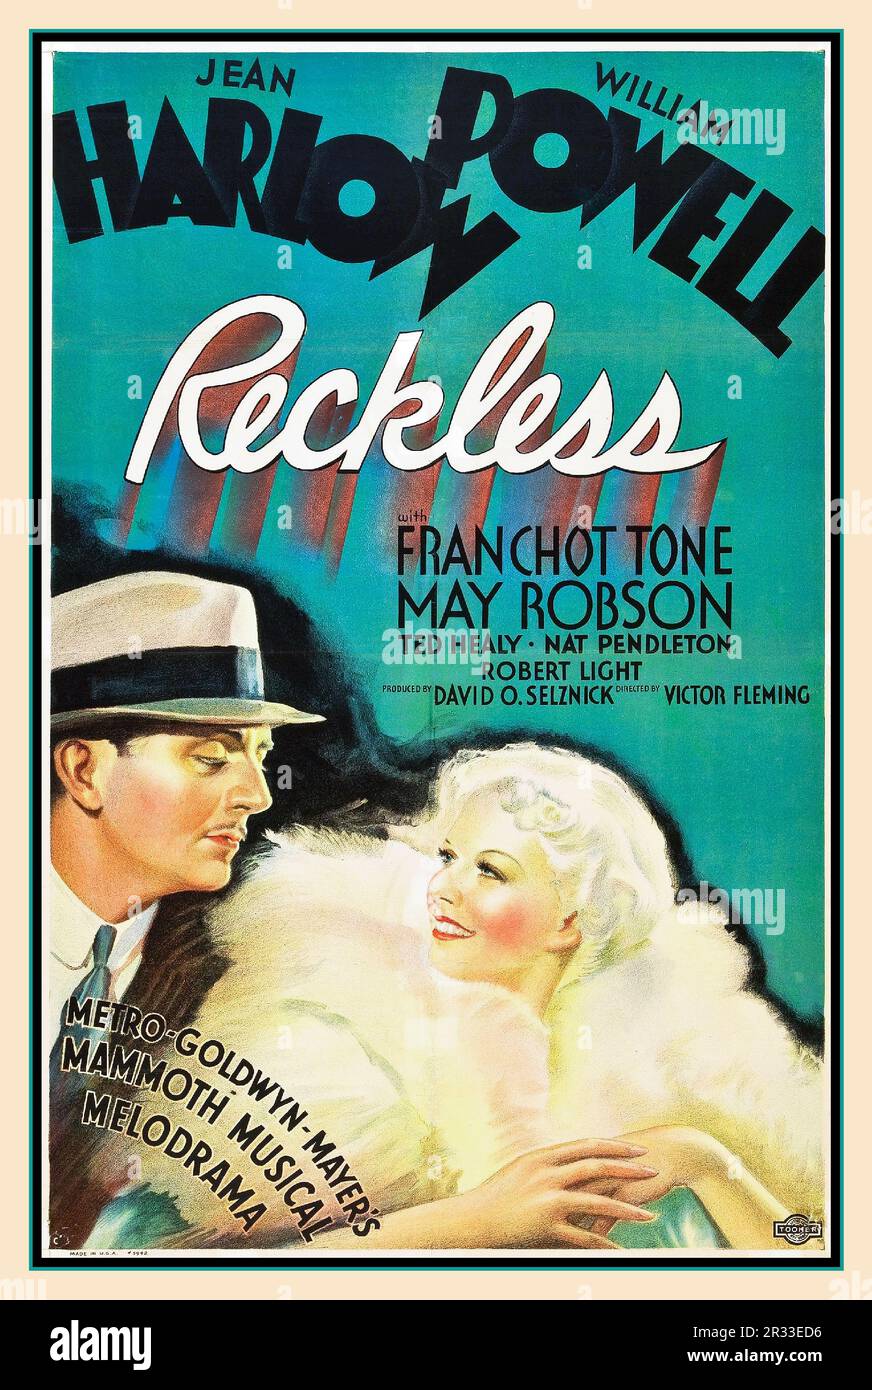 RECKLESS Vintage Movie Poster per il film del 1935 reckless. Con Jean Harlow e William Powell in RECKLESS (1935), diretto da Victor Fleming, MGM Mayers Mammoth Musical Melodramma Hollywood USA Foto Stock